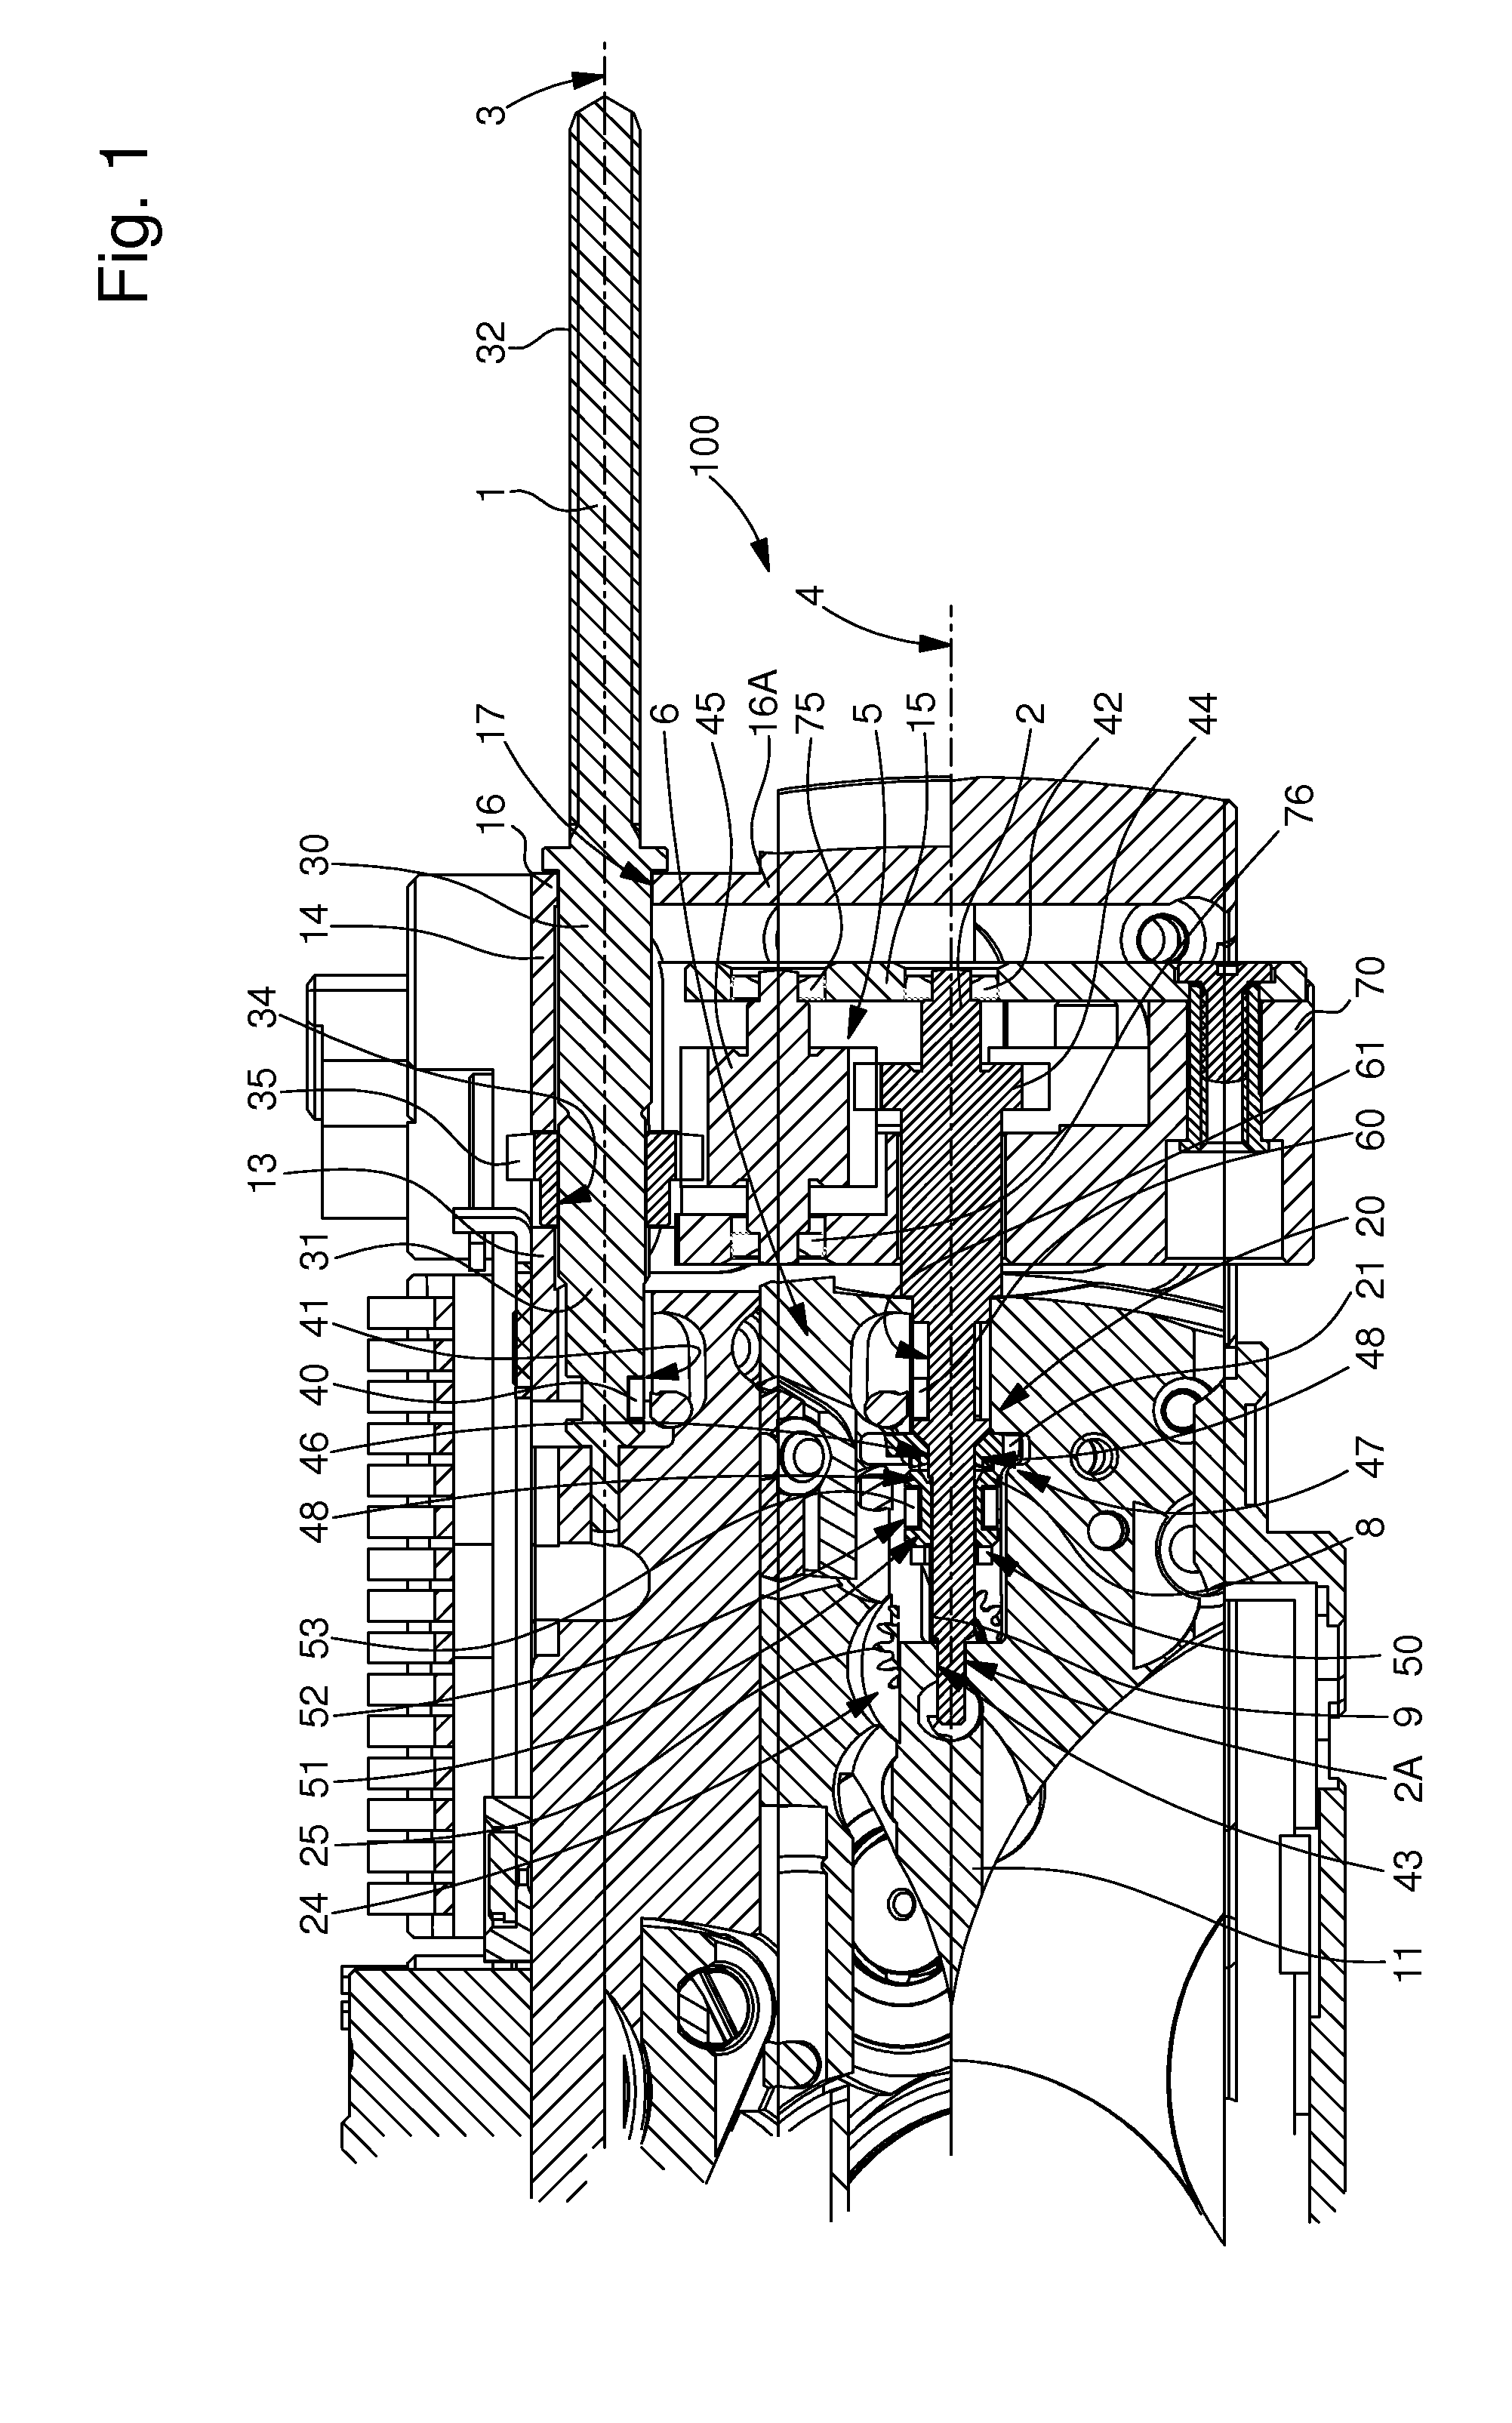 Winding and time-setting control device for a timepiece movement